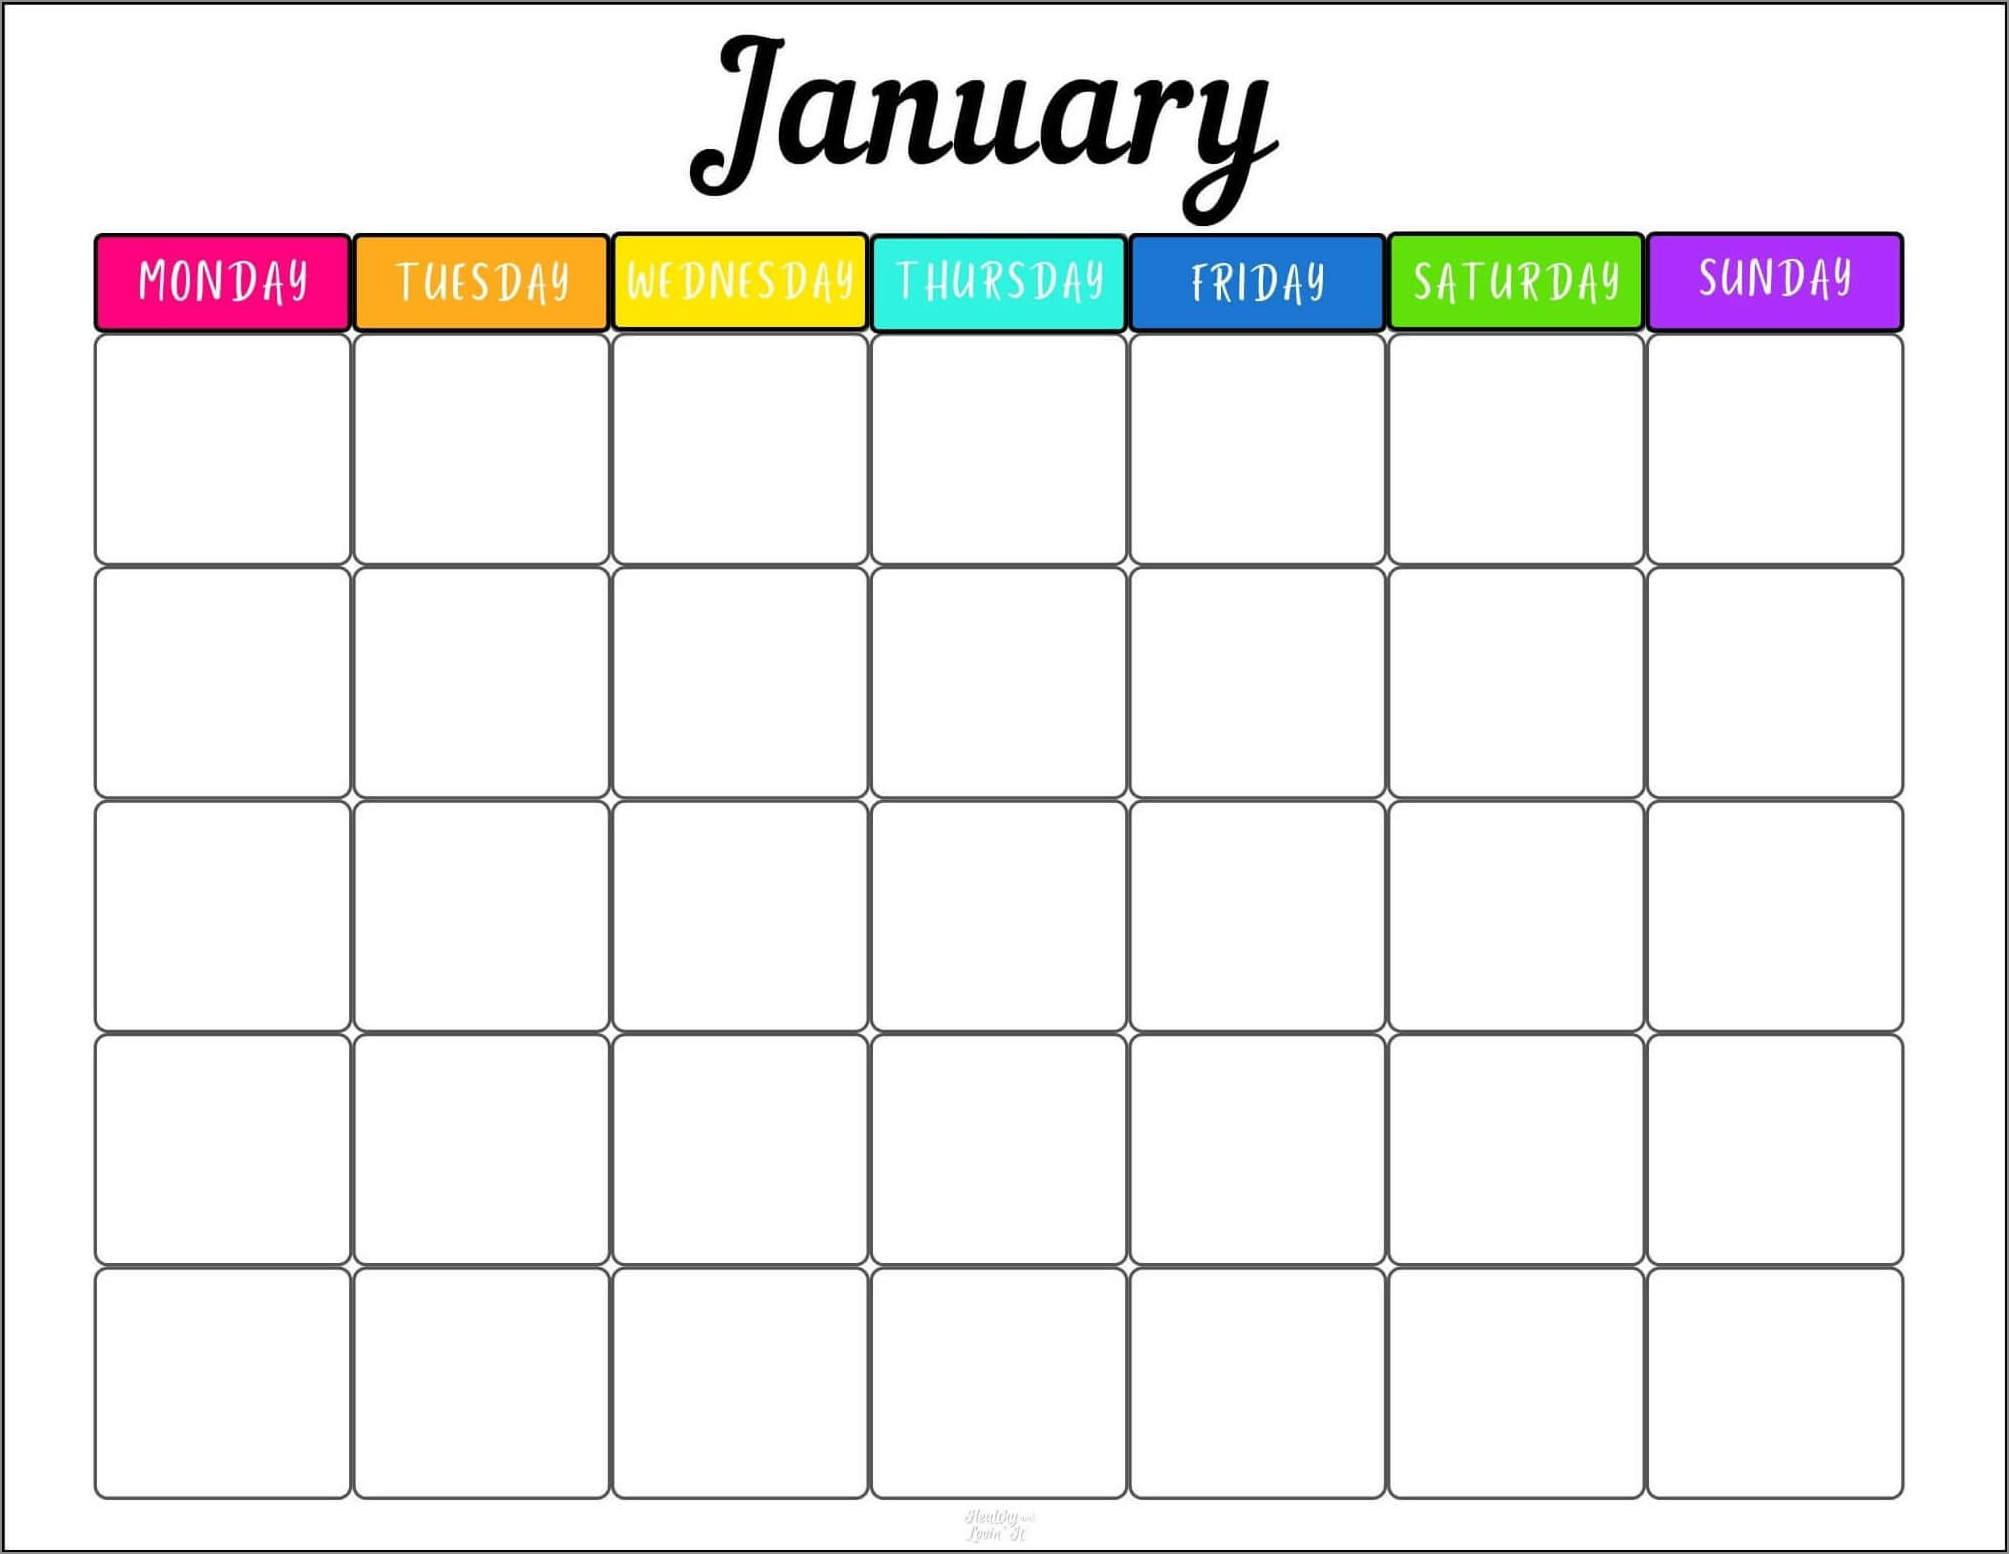 sample of calendar template for schedule